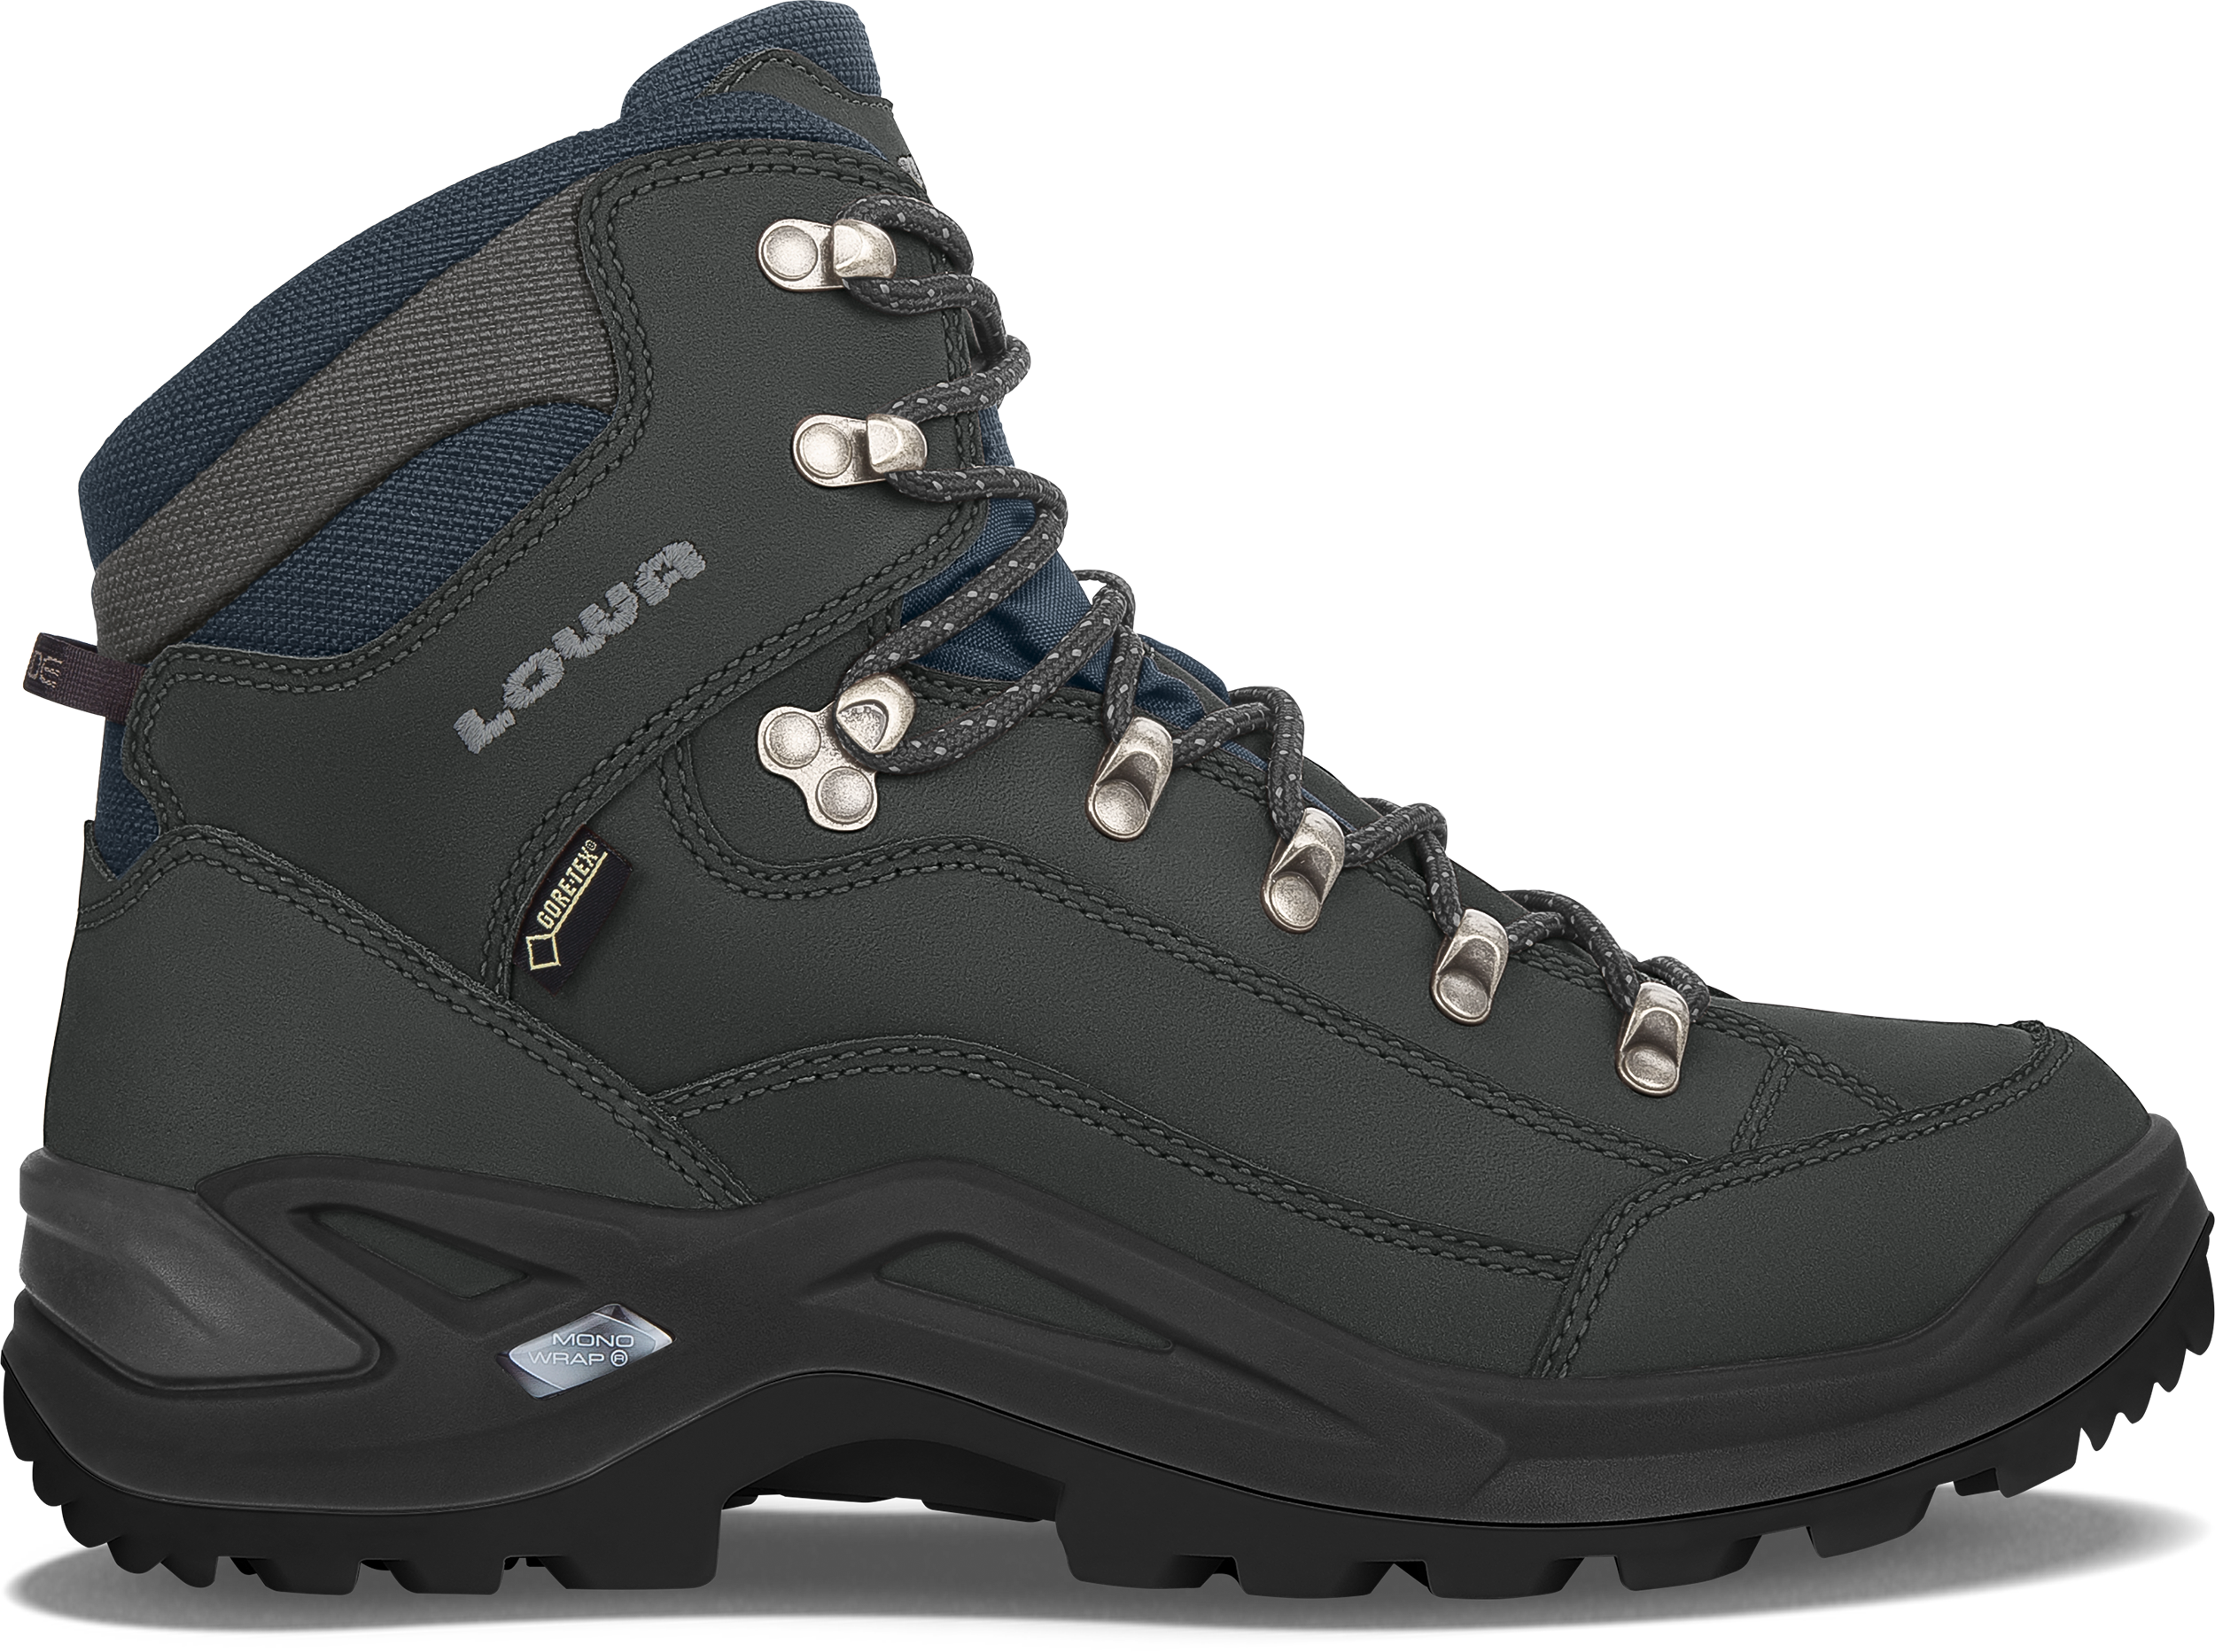 RENEGADE GTX MID: ALL TERRAIN CLASSIC shoes for men | LOWA INT